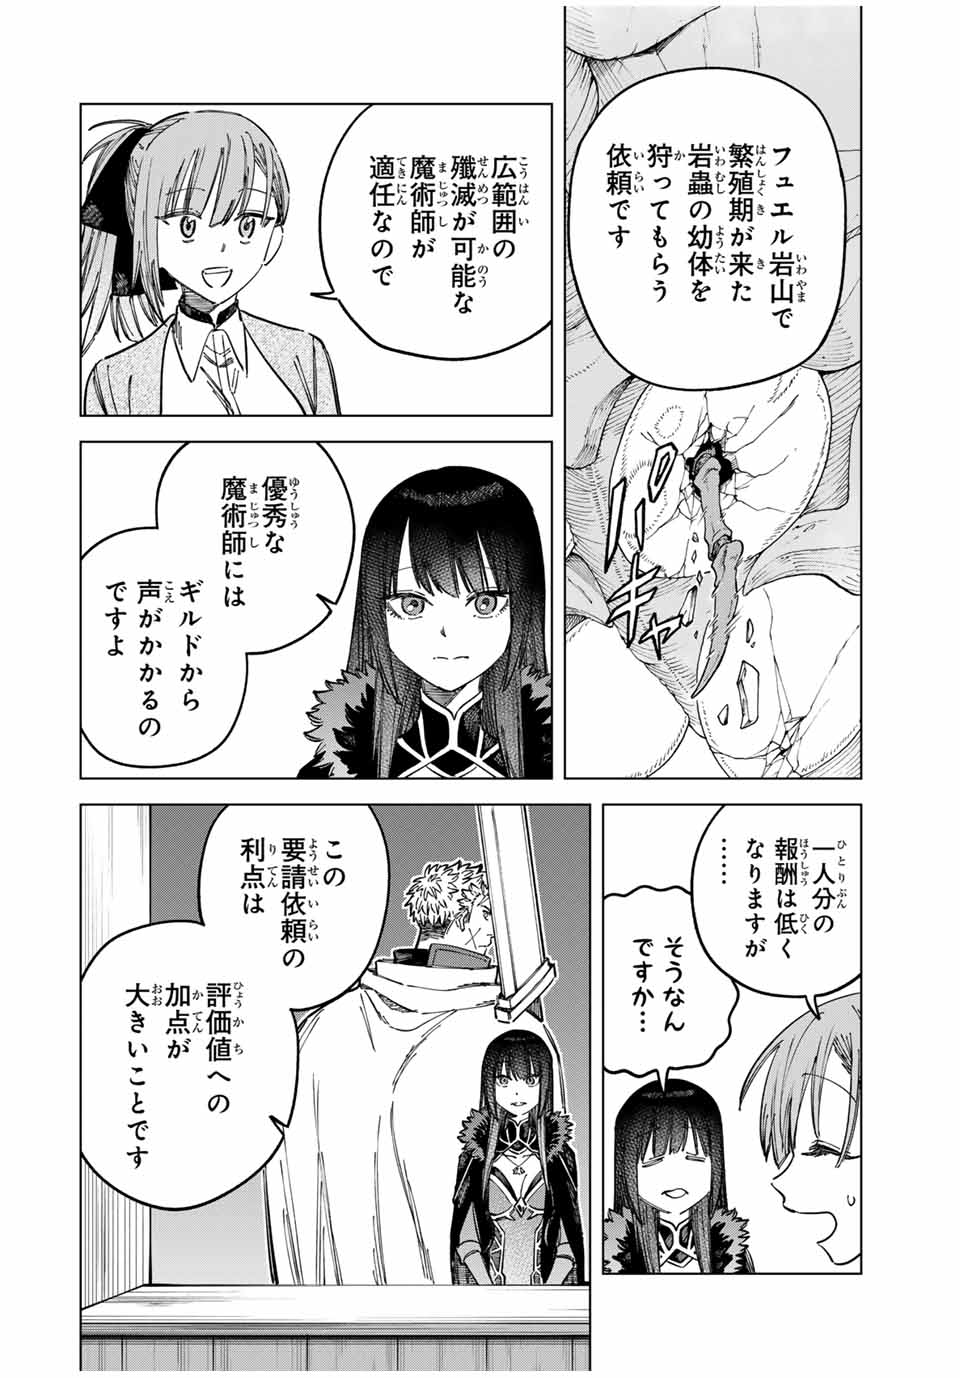 Witch and Mercenary 魔女と傭兵 第10話 - Page 2